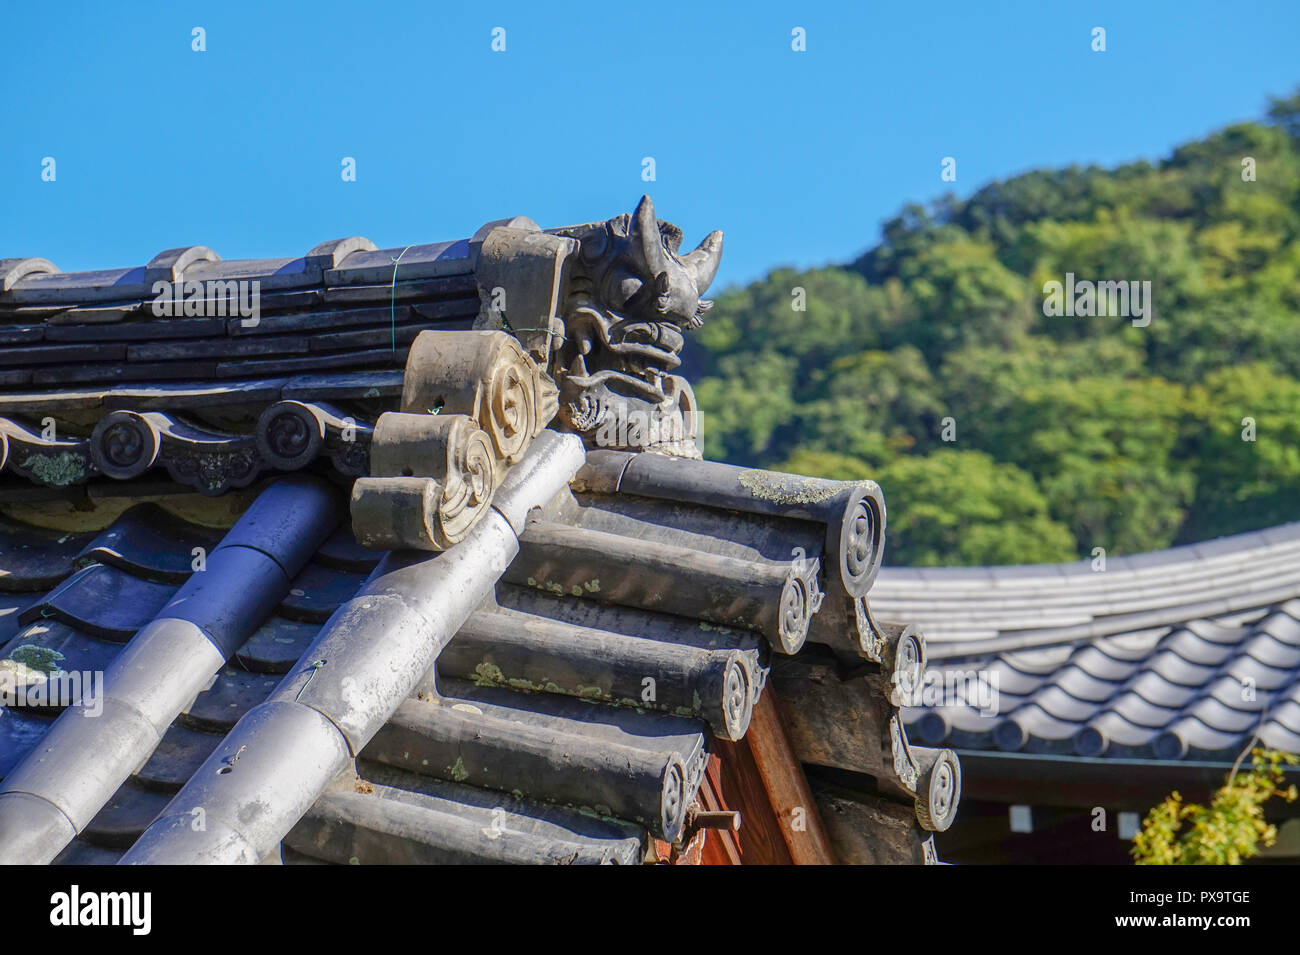 Japanese roof top with Onigawara roof tiles Stock Photo